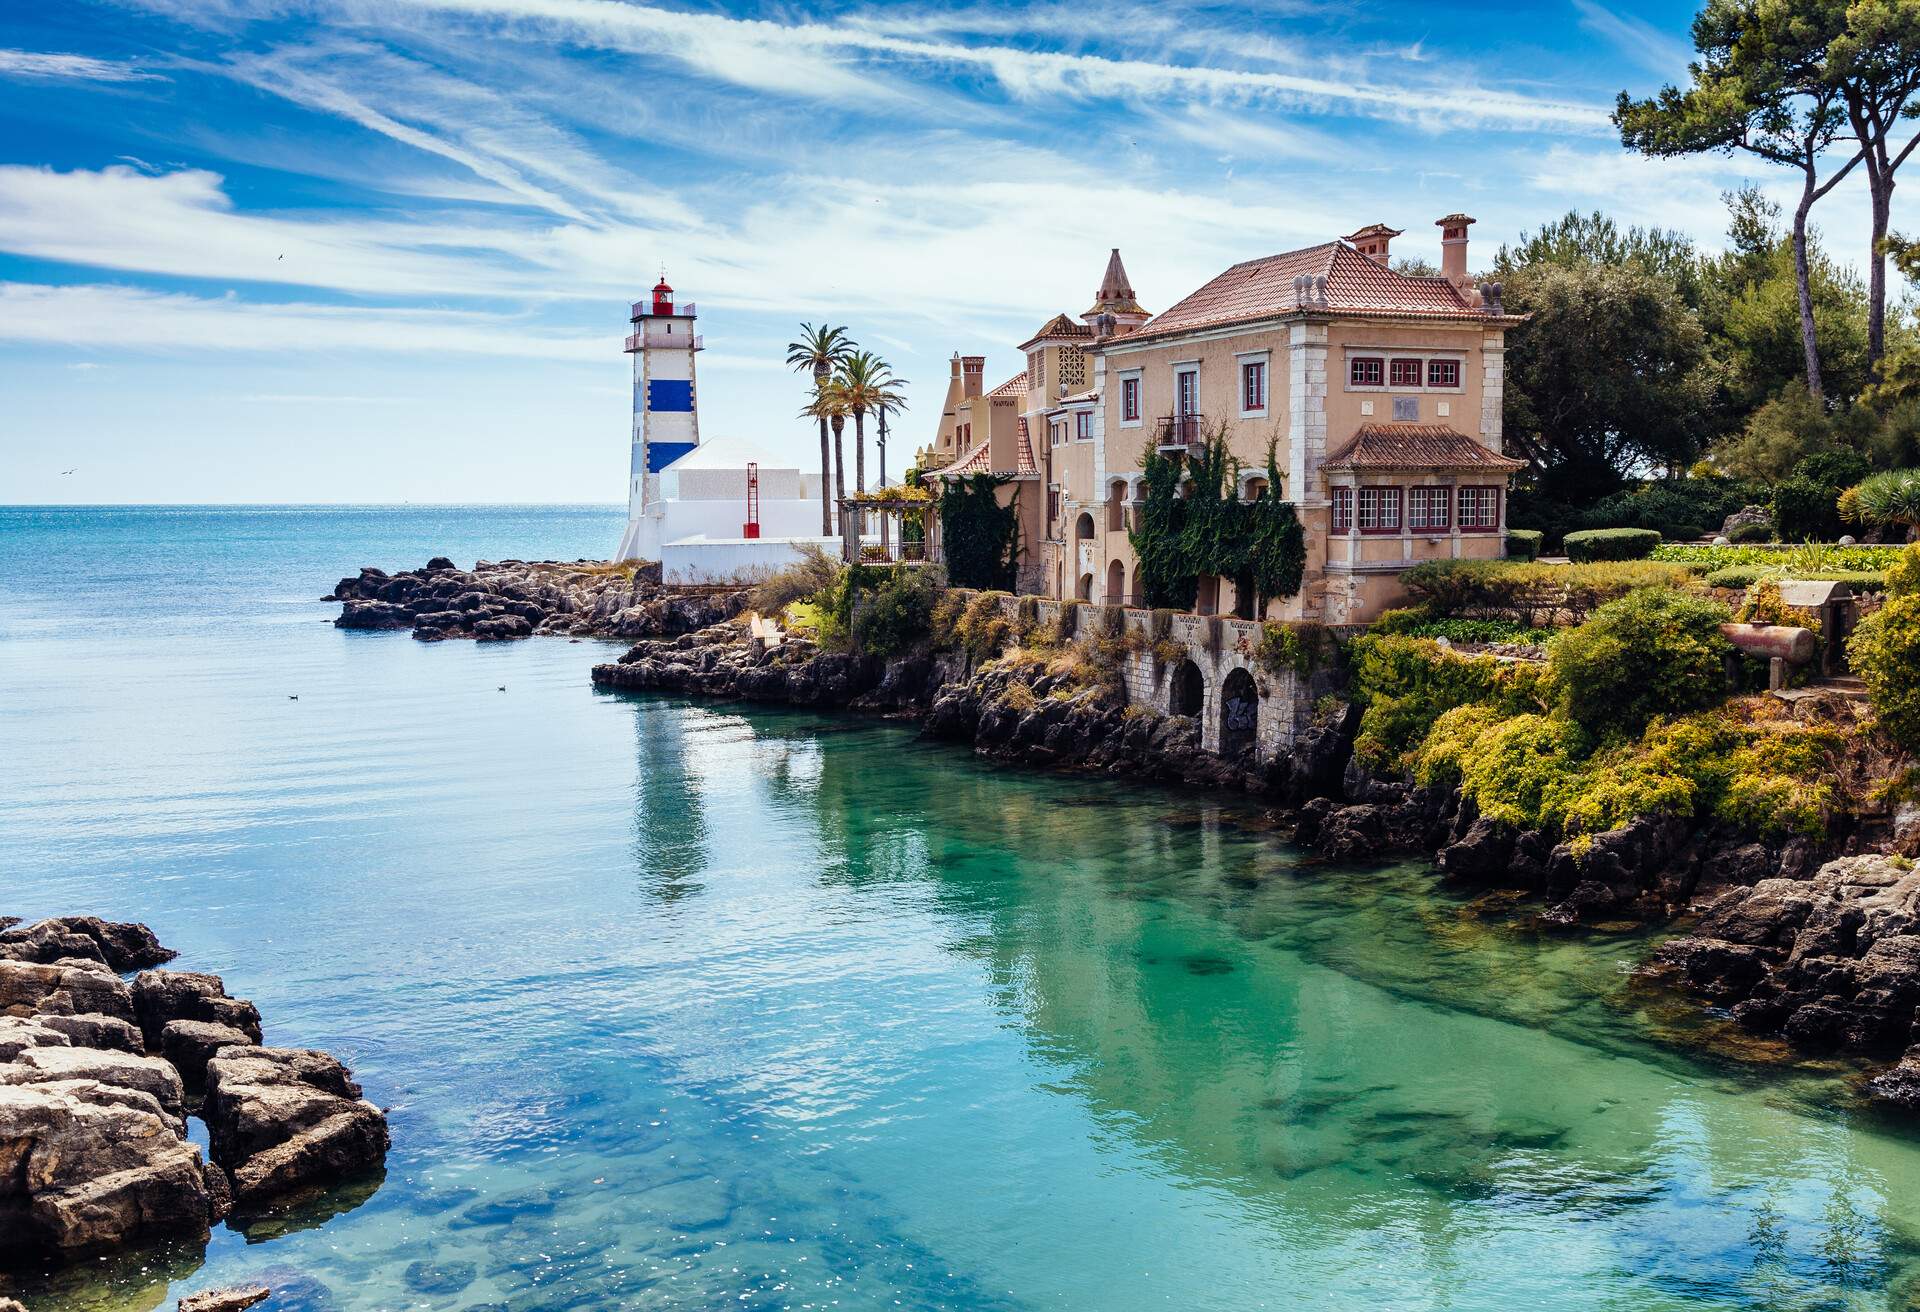 Santa Marta Lighthouse and Museum in Cascais, Lisbon district, Portugal; Shutterstock ID 735050020